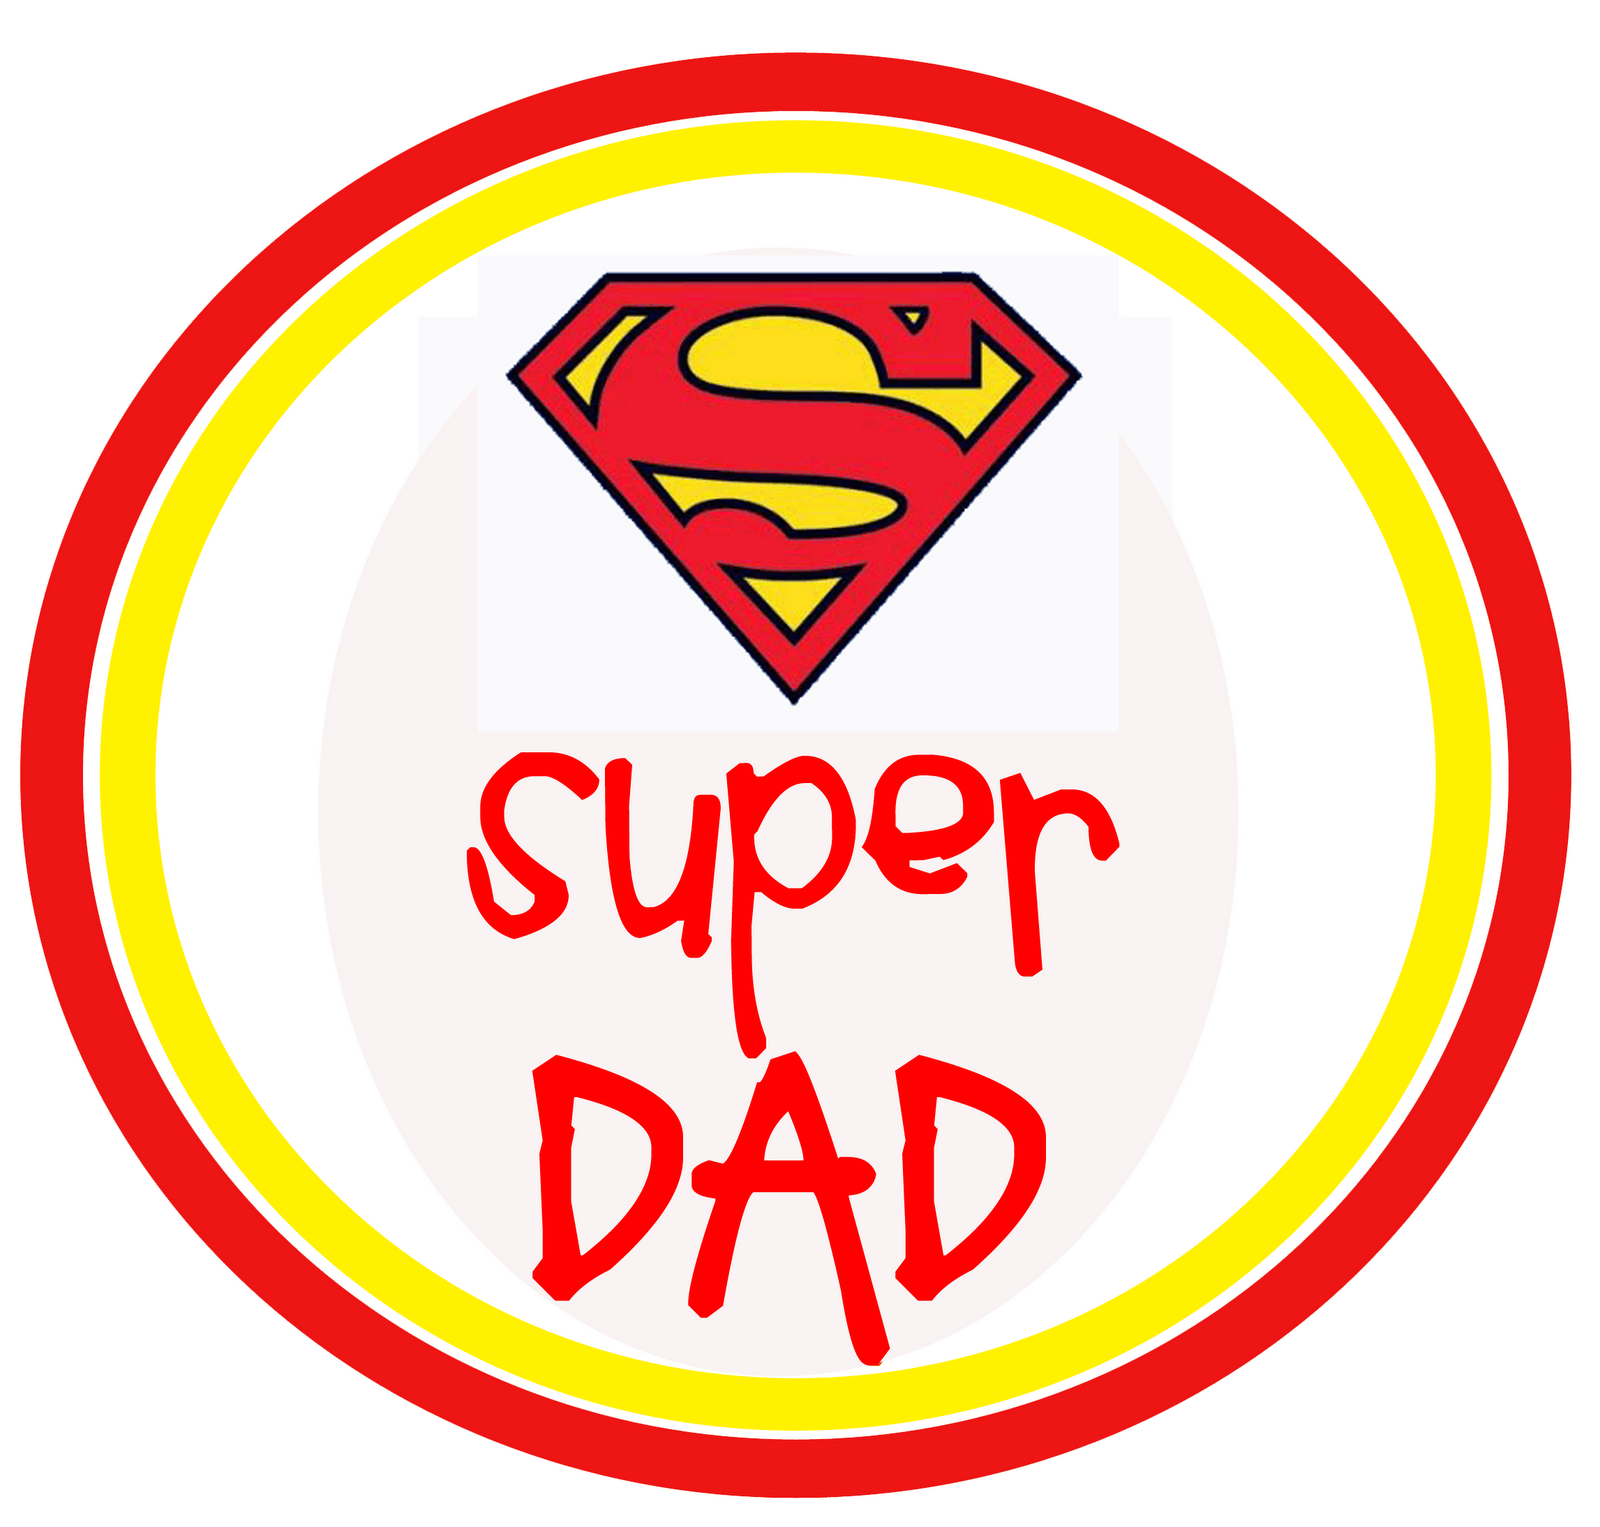 Fathers day free clip art father clipart image